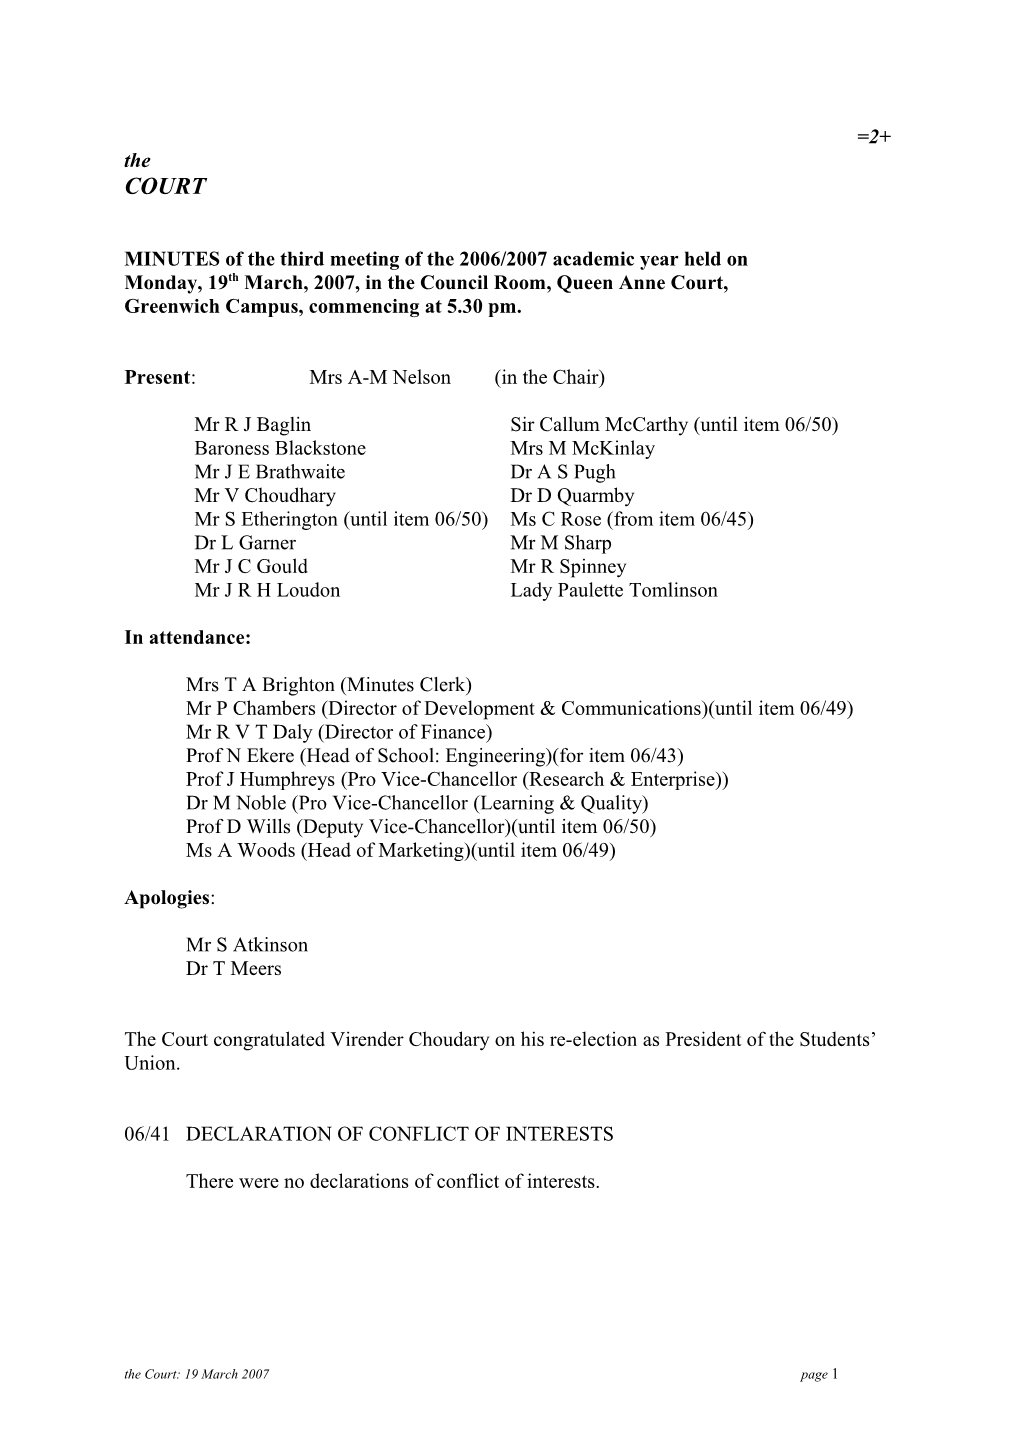 MINUTES of the Third Meeting of the 2006/2007 Academic Year Held On